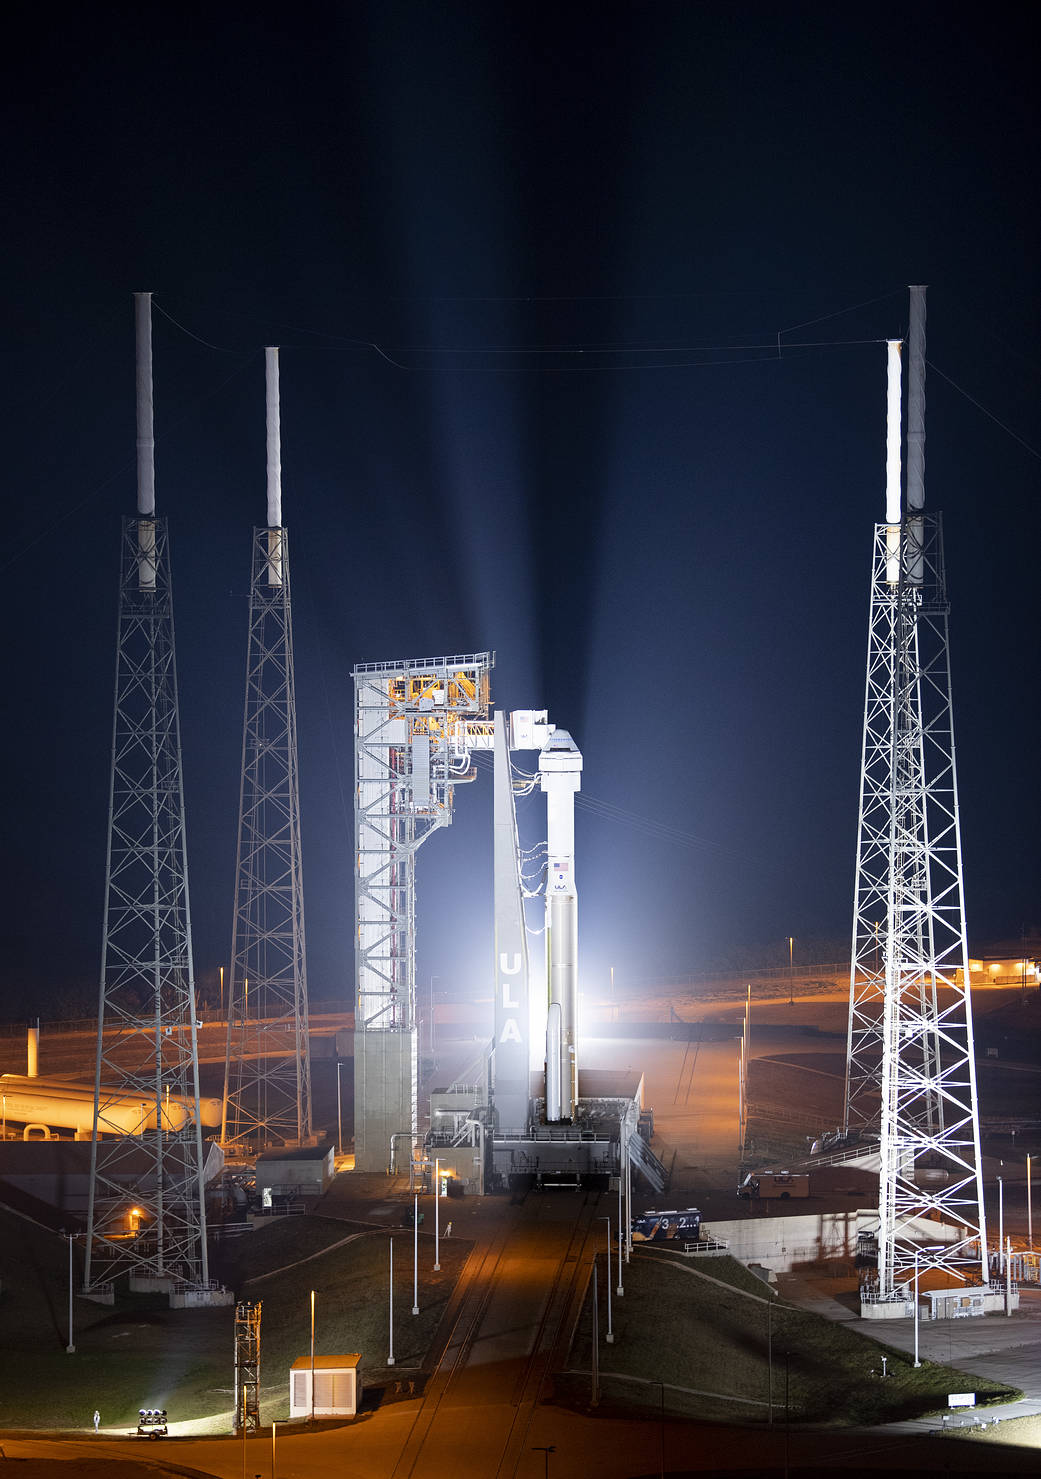 A United Launch Alliance Atlas V rocket with Boeing’s CST-100 Starliner spacecraft aboard is seen illuminated by spotlights on the launch pad at Space Launch Complex 41 ahead of the Orbital Flight Test-2 mission.